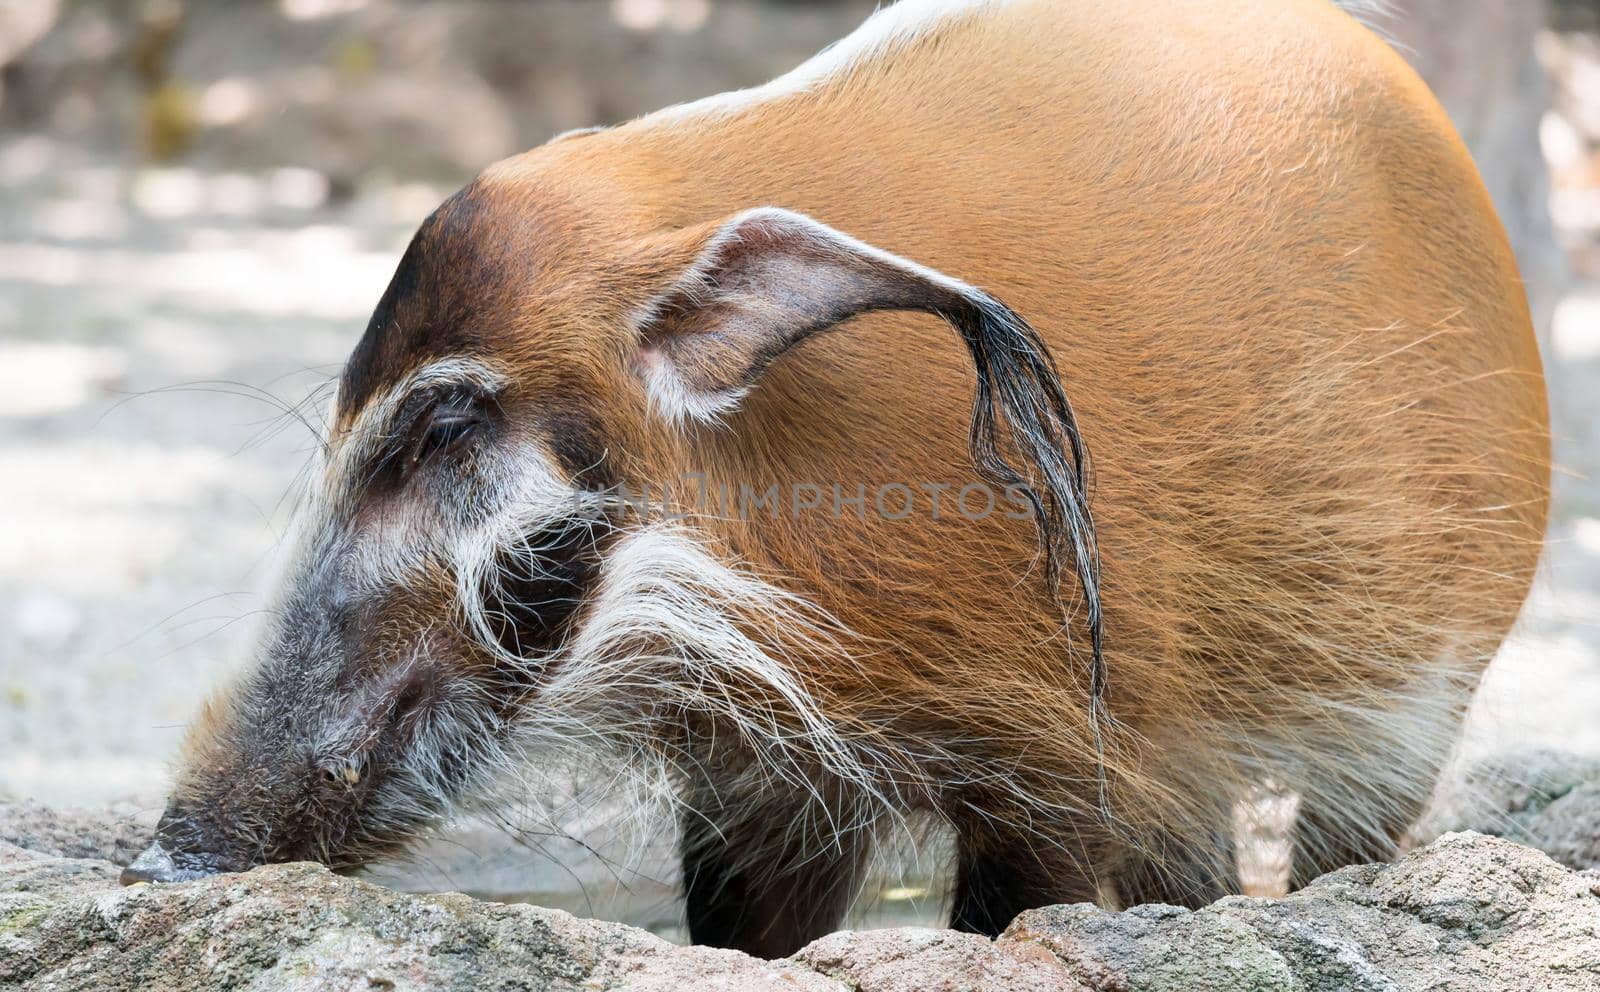 African golden boar or pig while looking for food on soil in a zoo